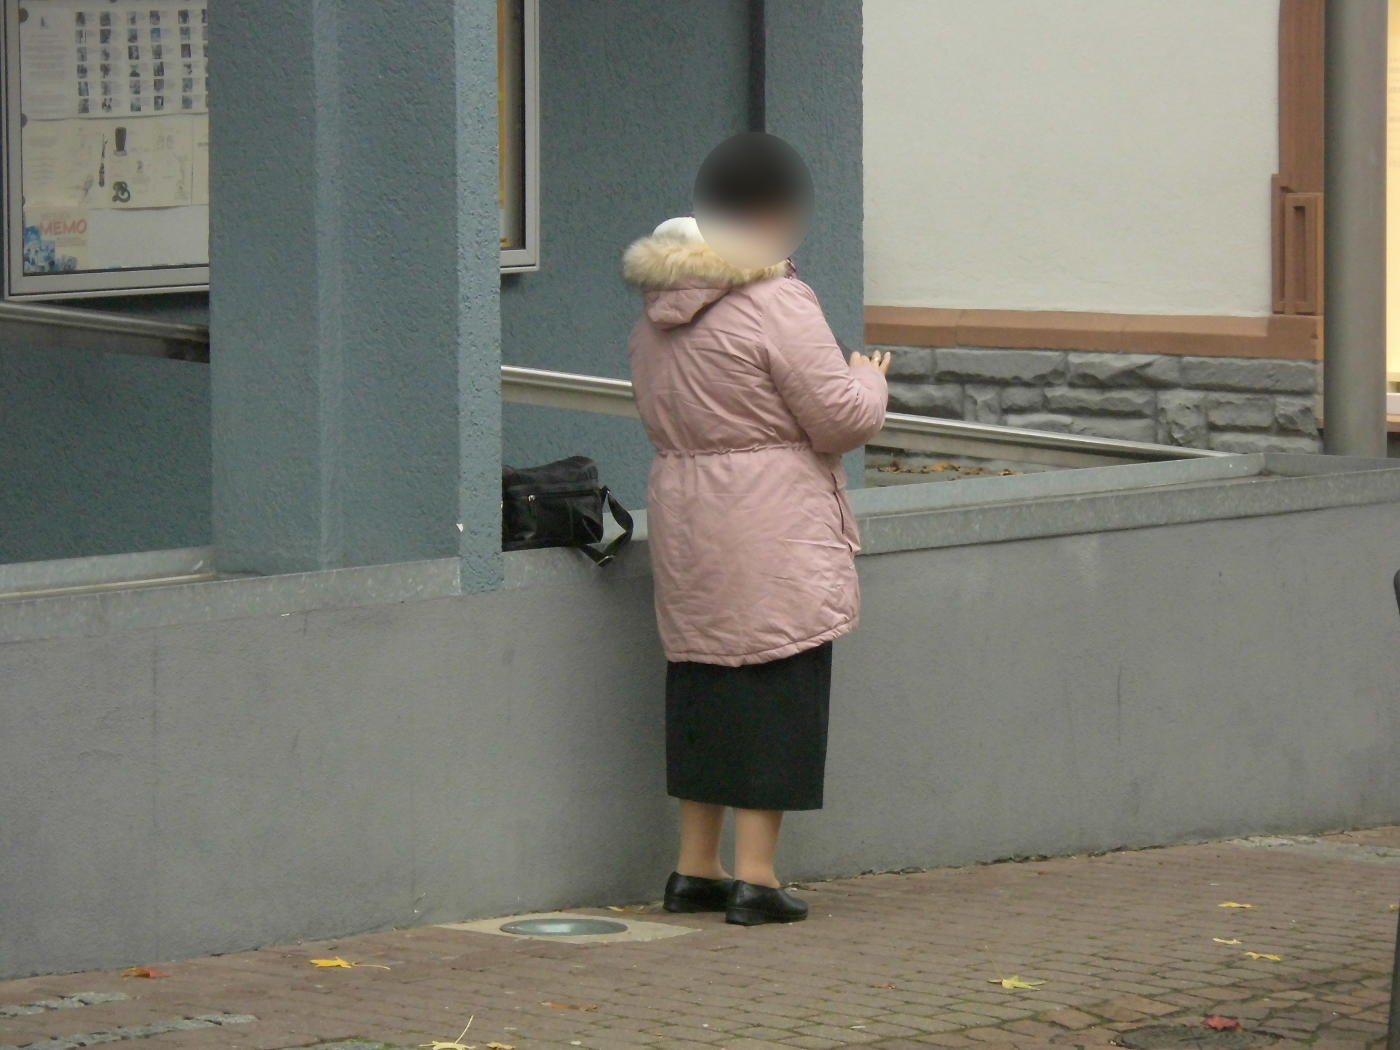 Jehovah's Witnesses in Wiesloch either helpless or bored ignorant